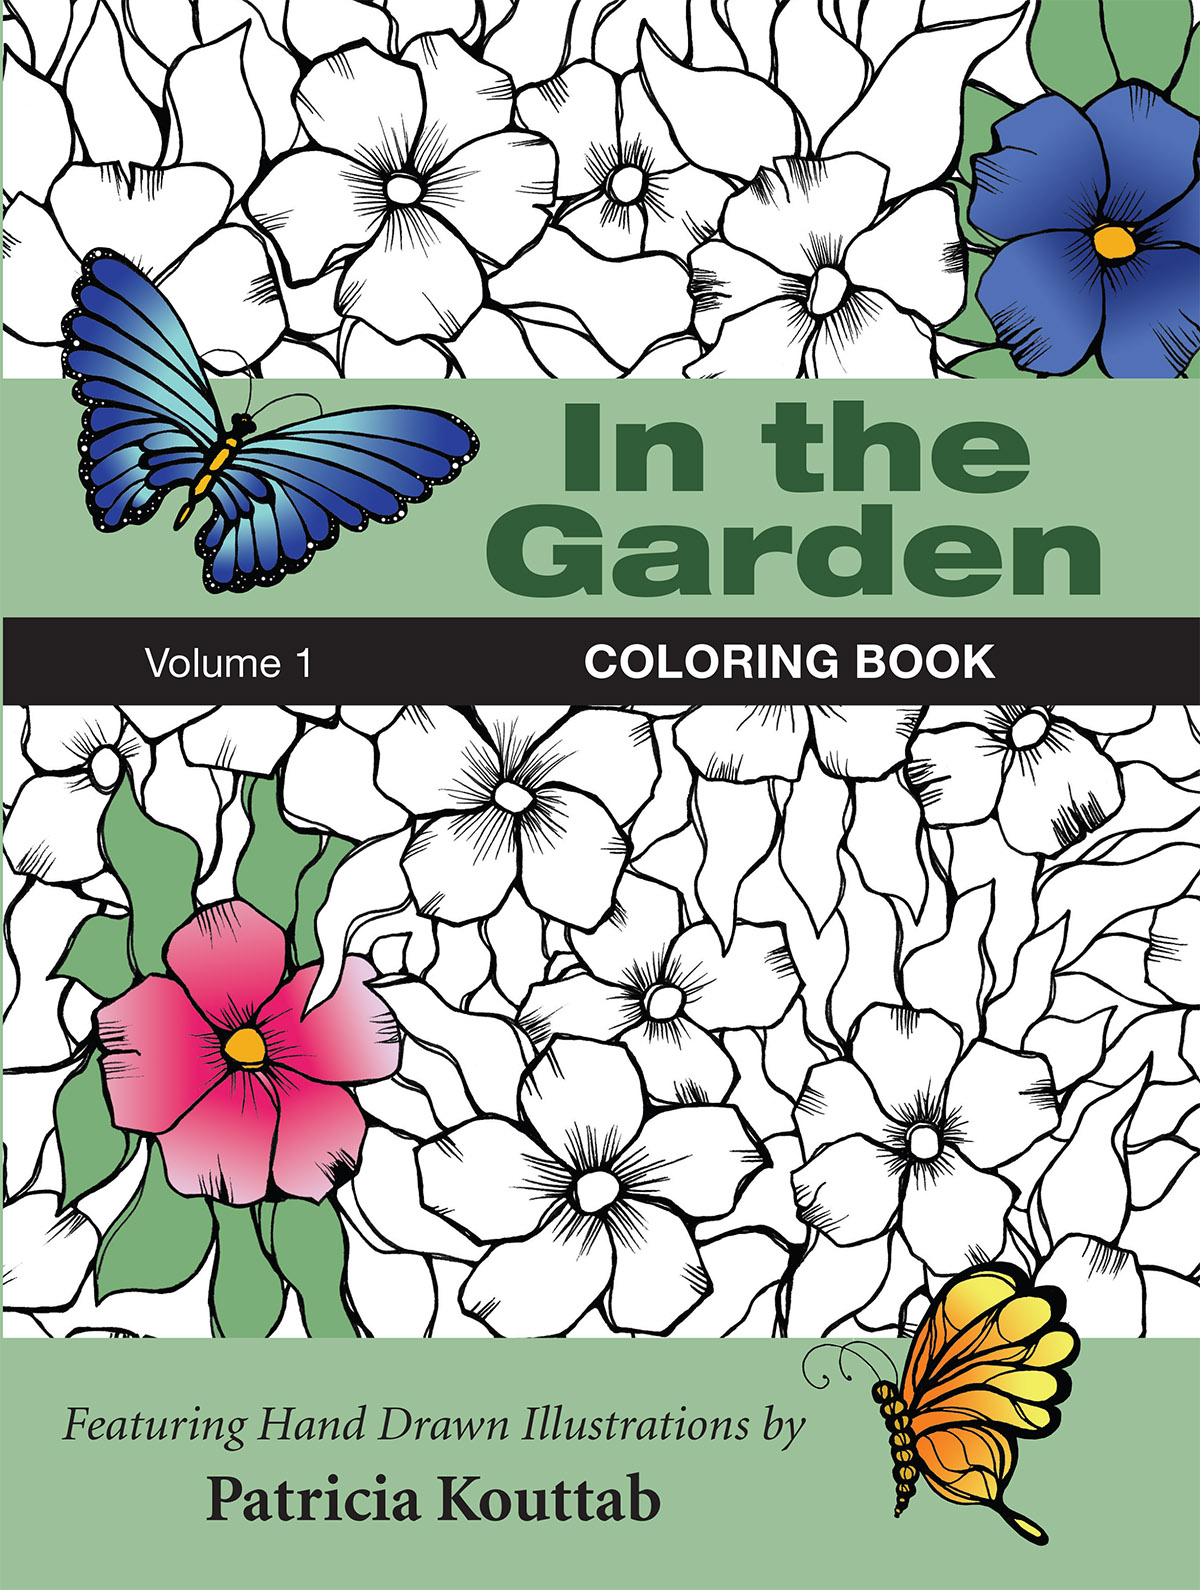 A Delightful, Relaxing Nature Coloring Book 